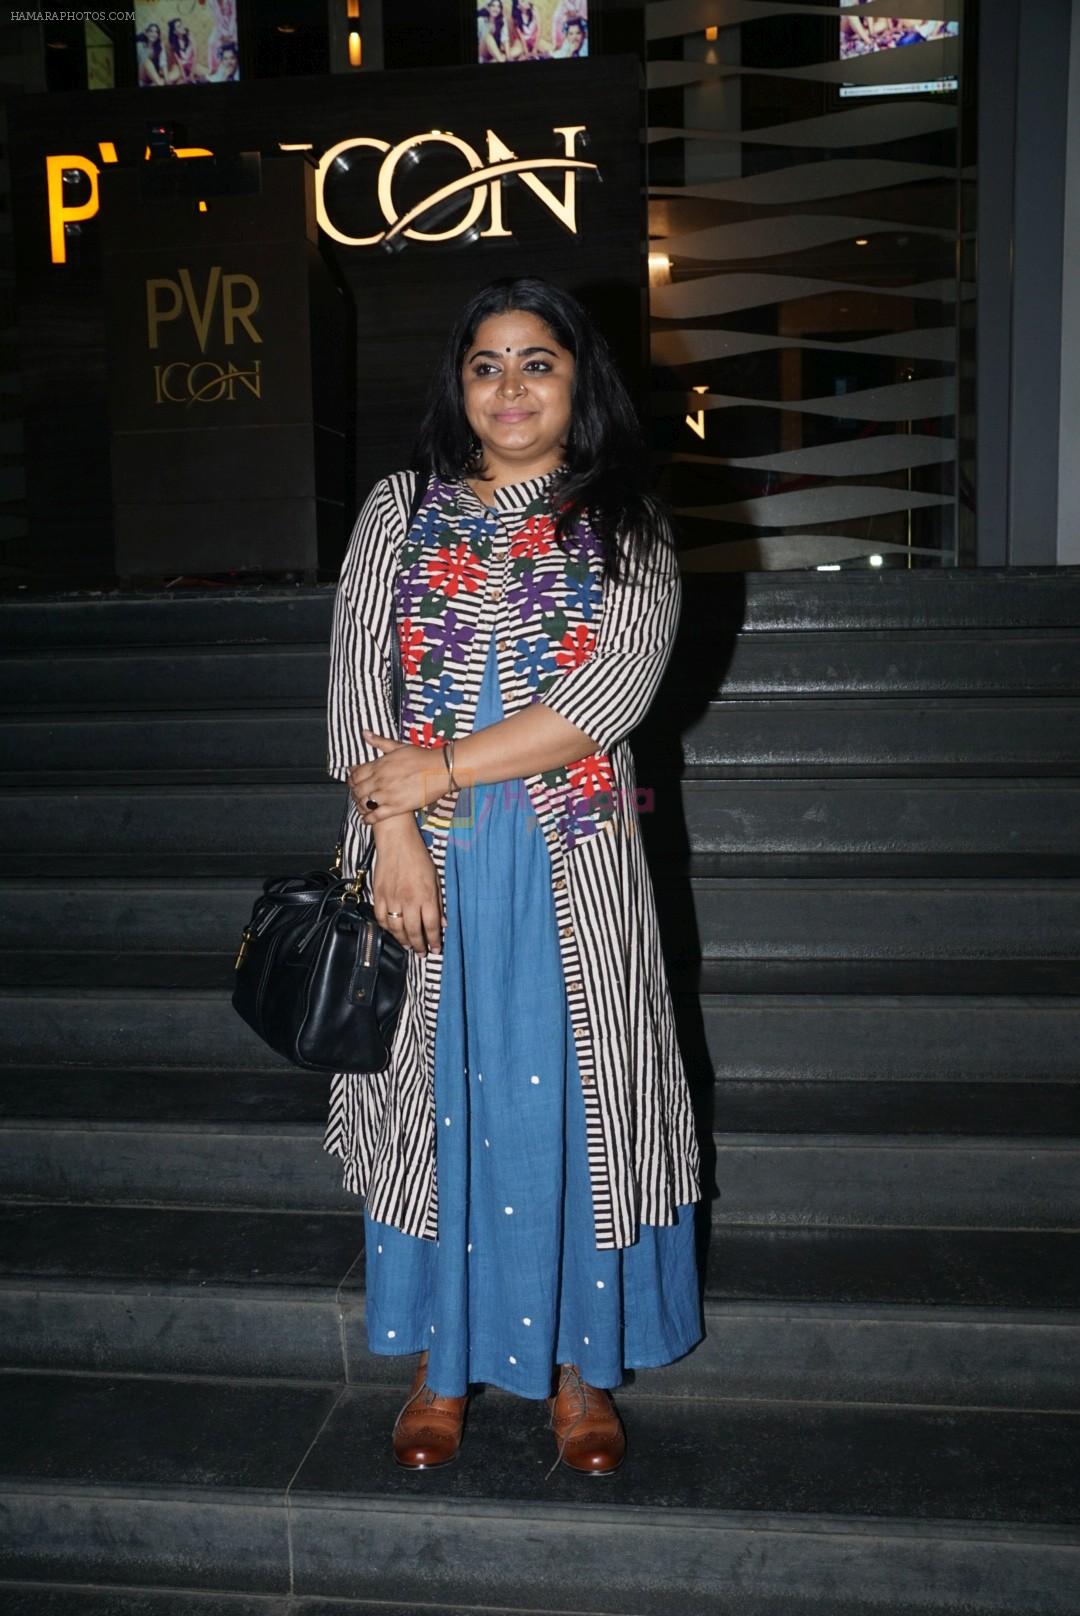 Ashwiny Iyer Tiwari at the screening of veere di wedding in pvr icon on 30th May 2018